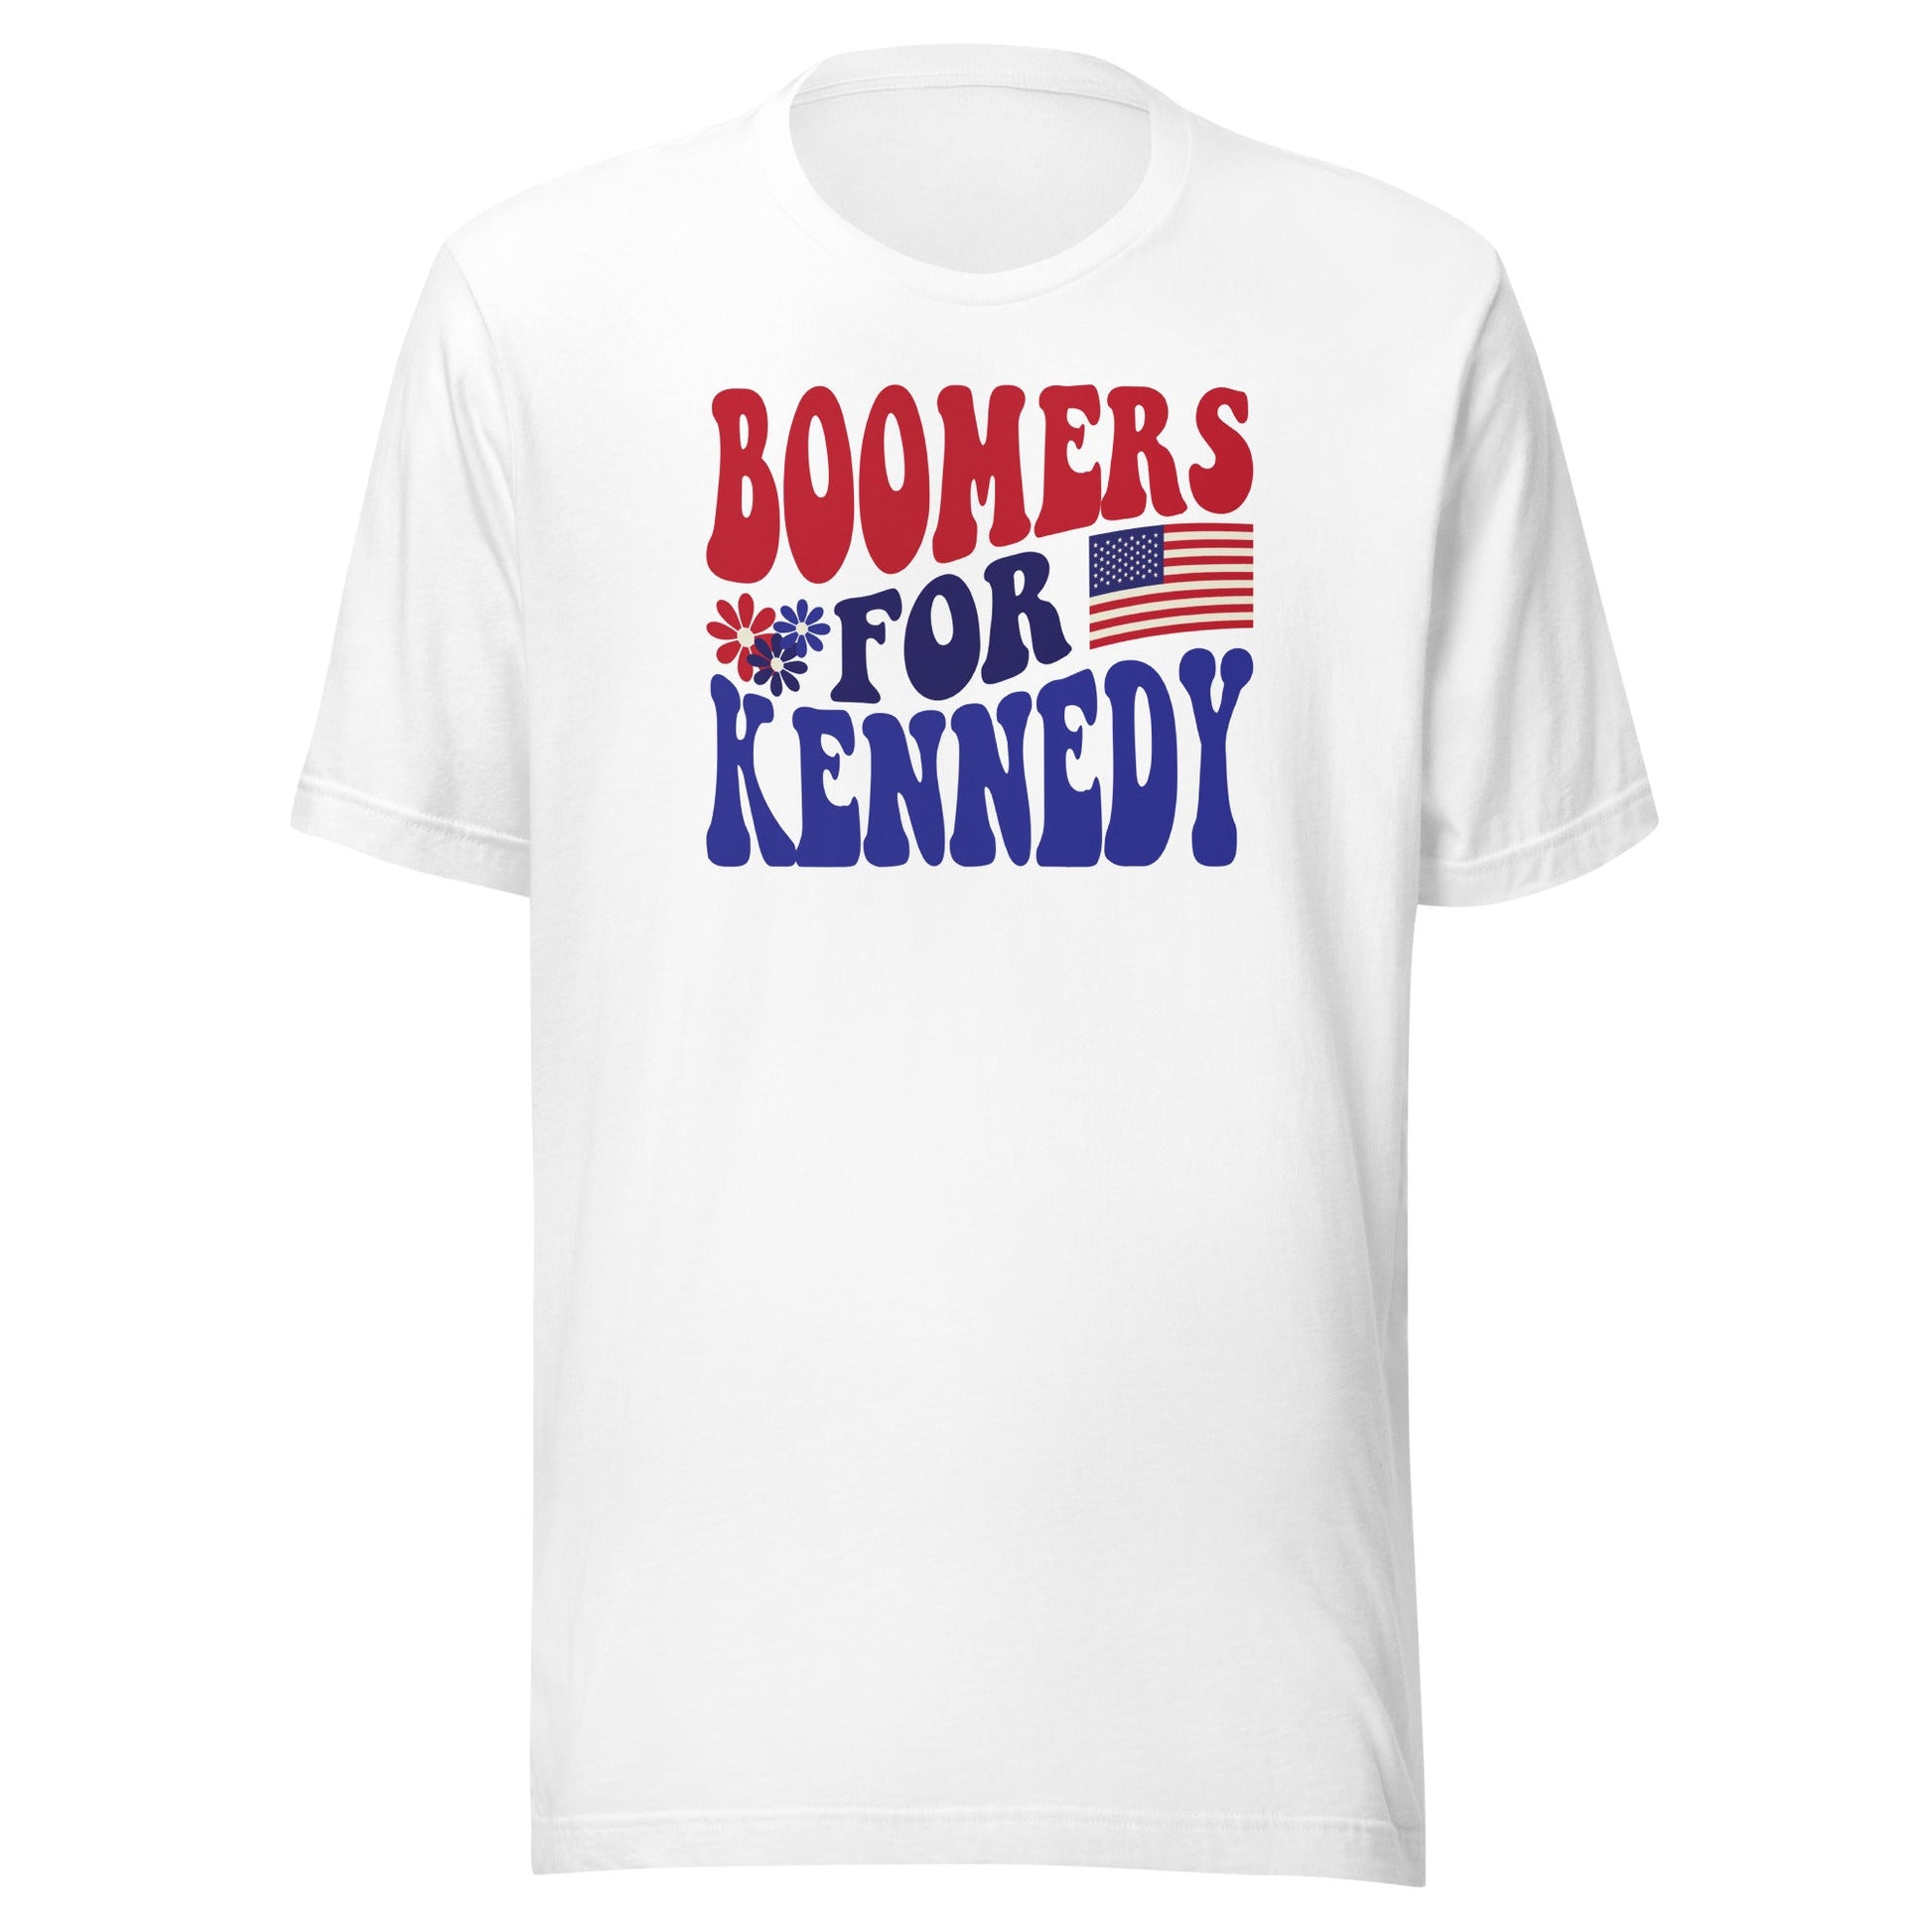 Boomers for Kennedy Unisex Tee - TEAM KENNEDY. All rights reserved